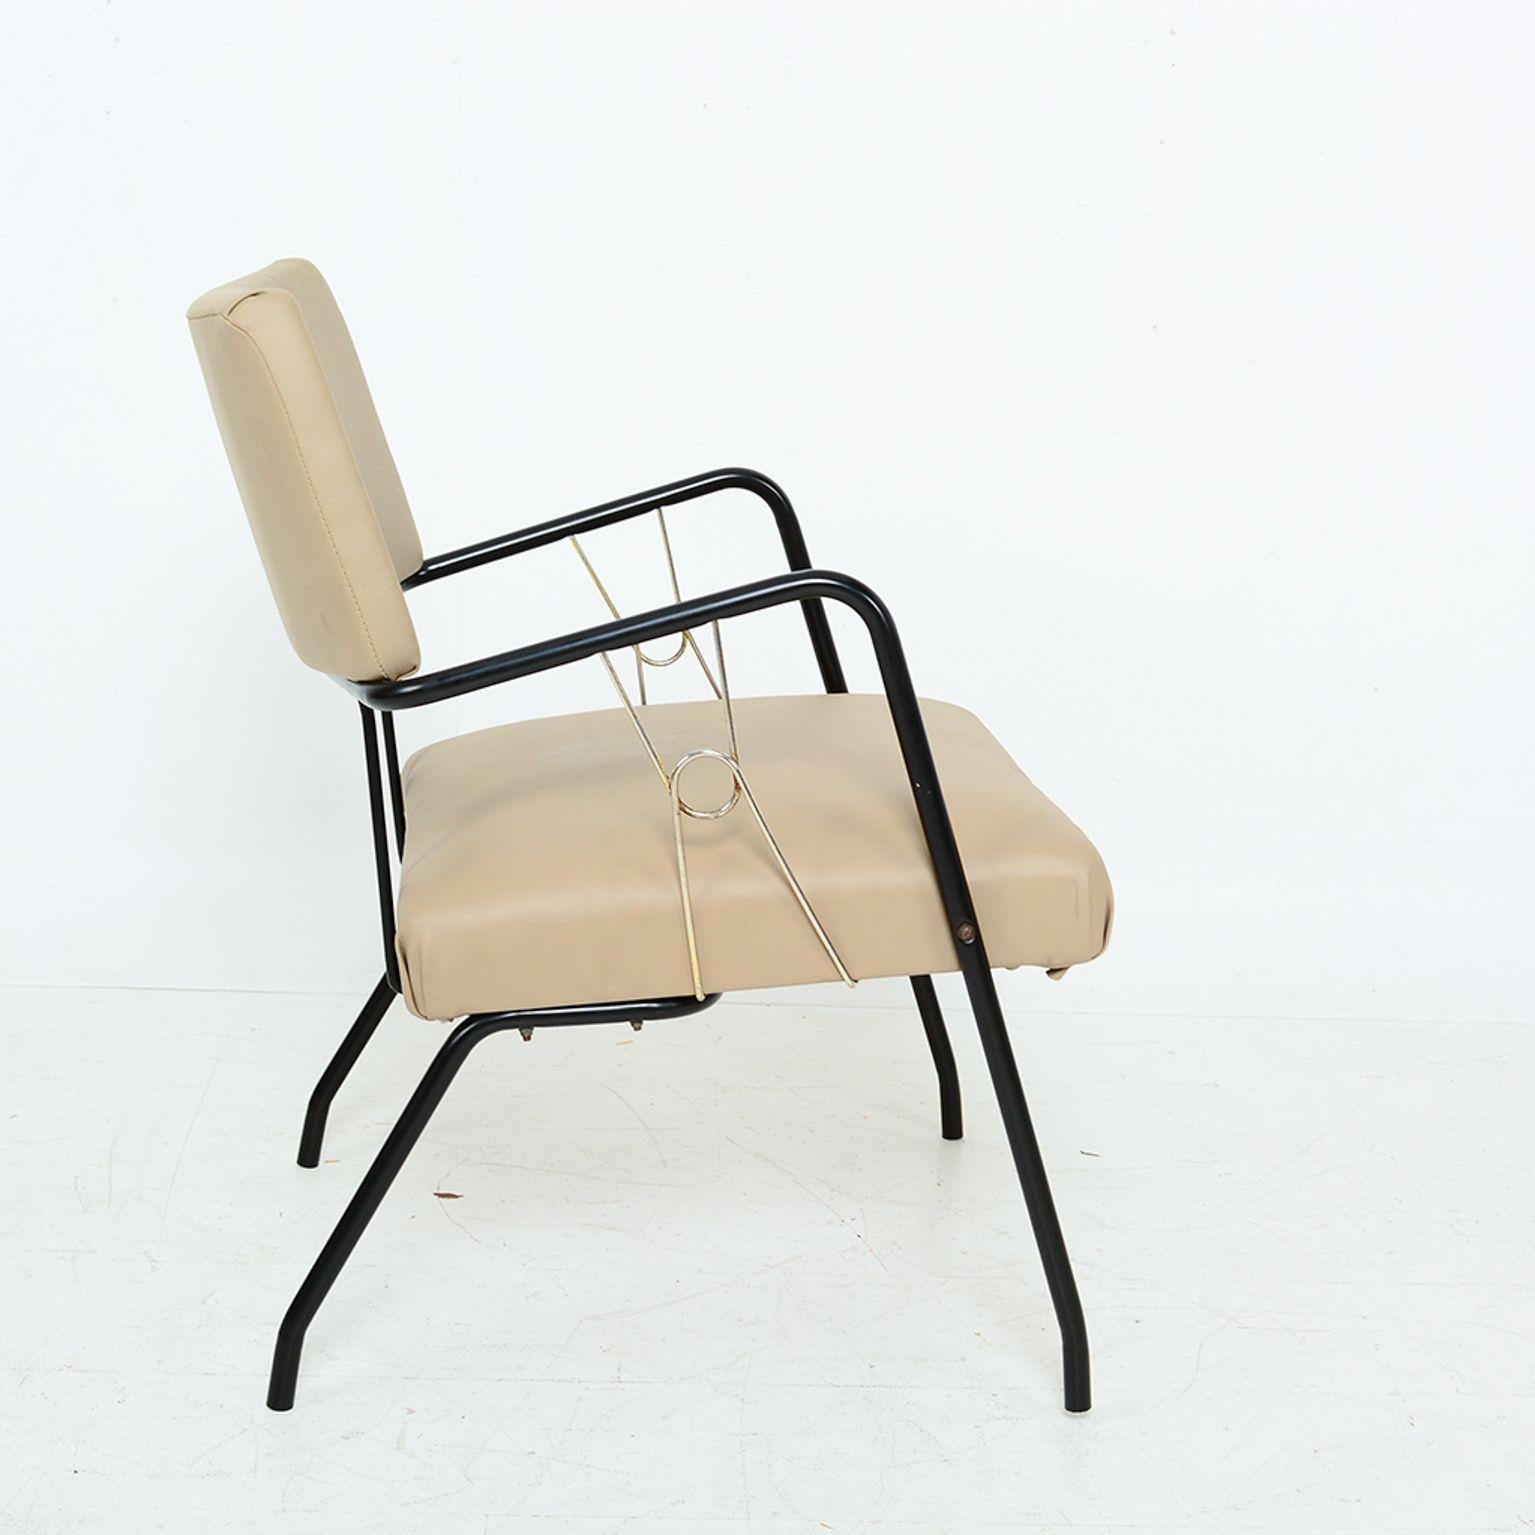 AMBIANIC presents
Tubular Iron Garden Patio Chair Midcentury Modern USA 1960s
Listing is for single chair. Three are available.
Seat has comfortable cushioned fabric. Nickel plated metal side trim.
Sculptural tubular Iron frame is black. Style